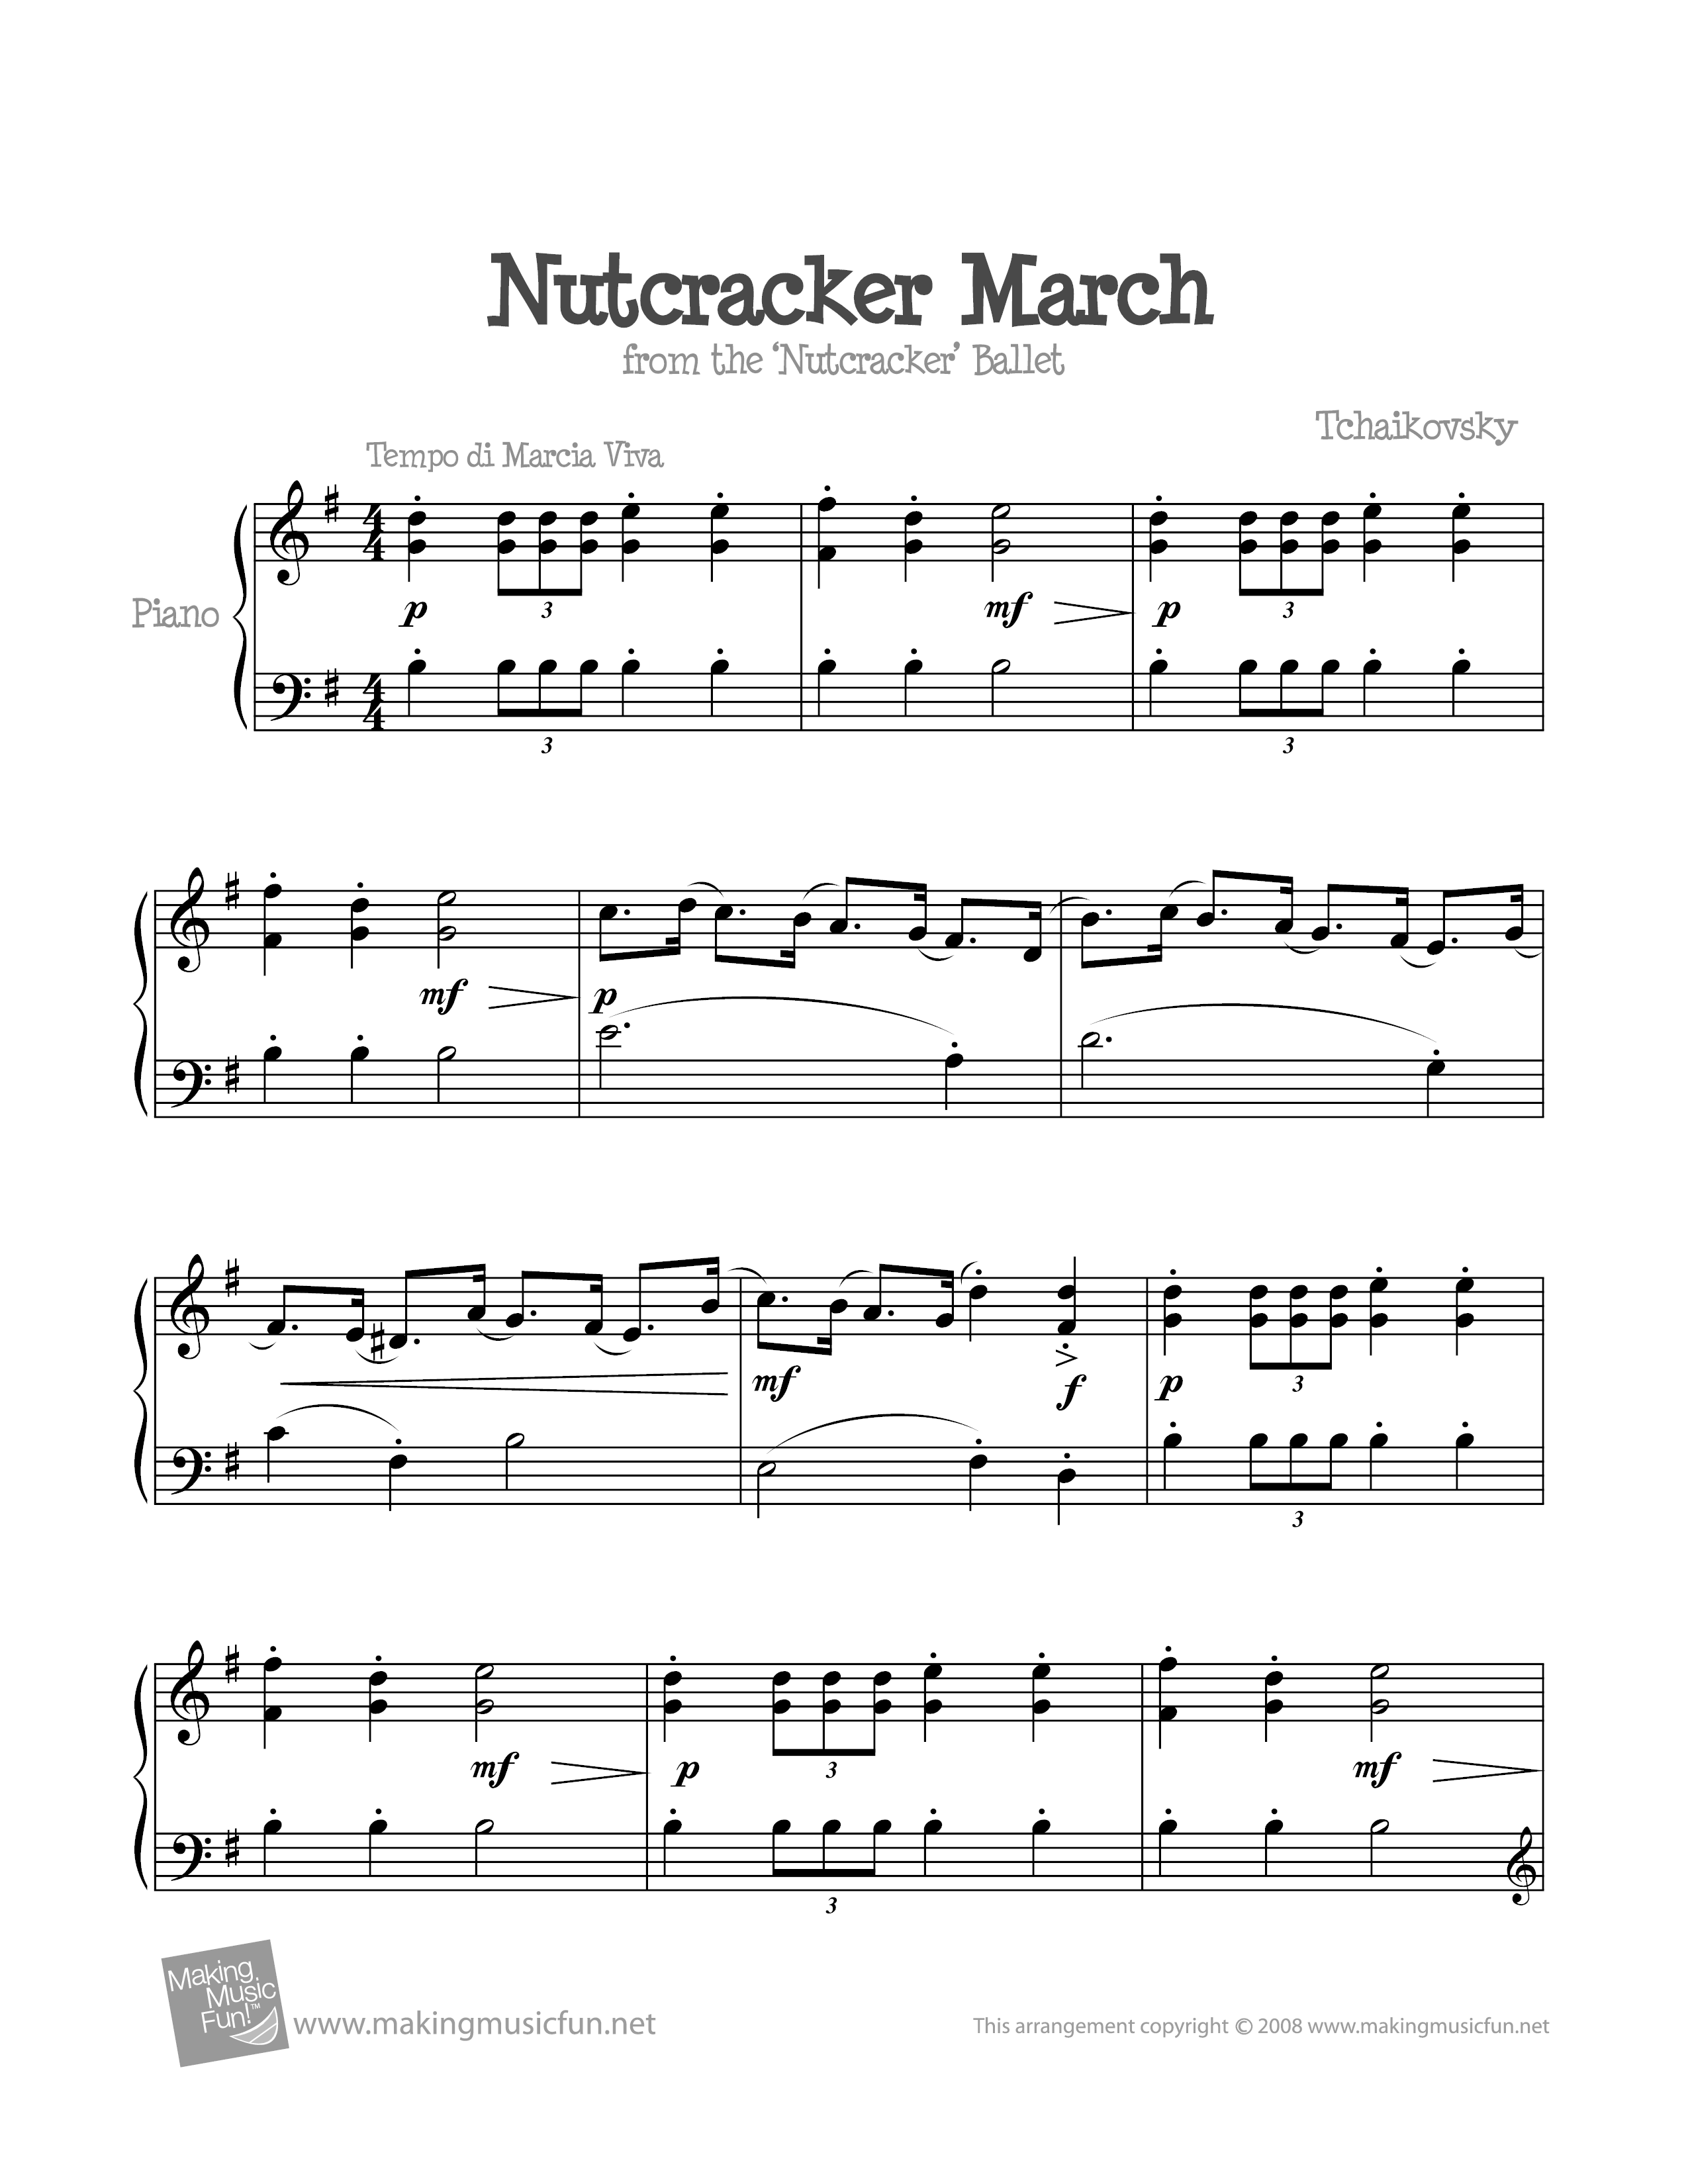 March from the Nutcracker琴譜